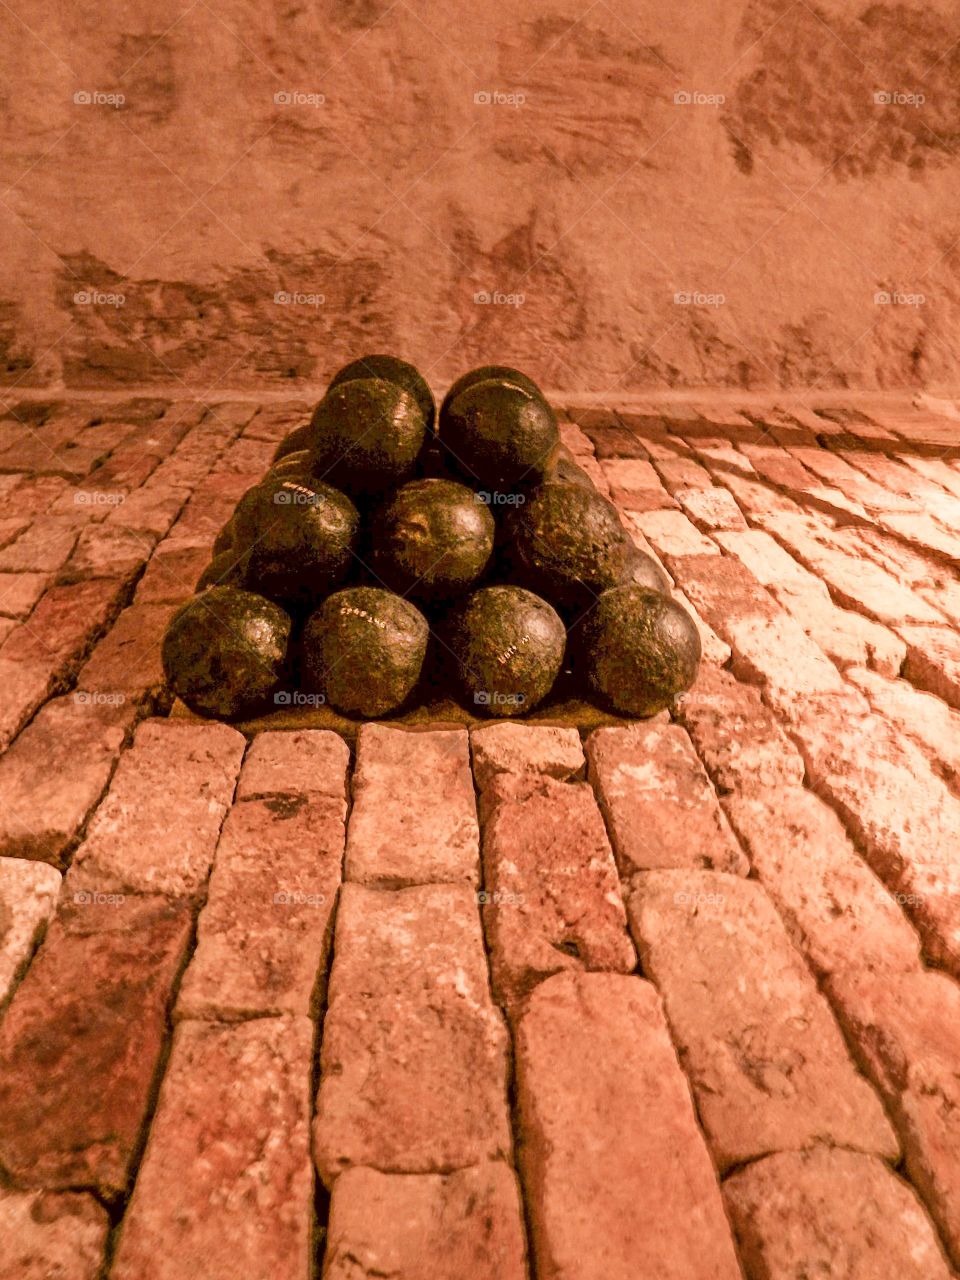 Still life of black cannon balls piled up nearly on a brick layered floor 